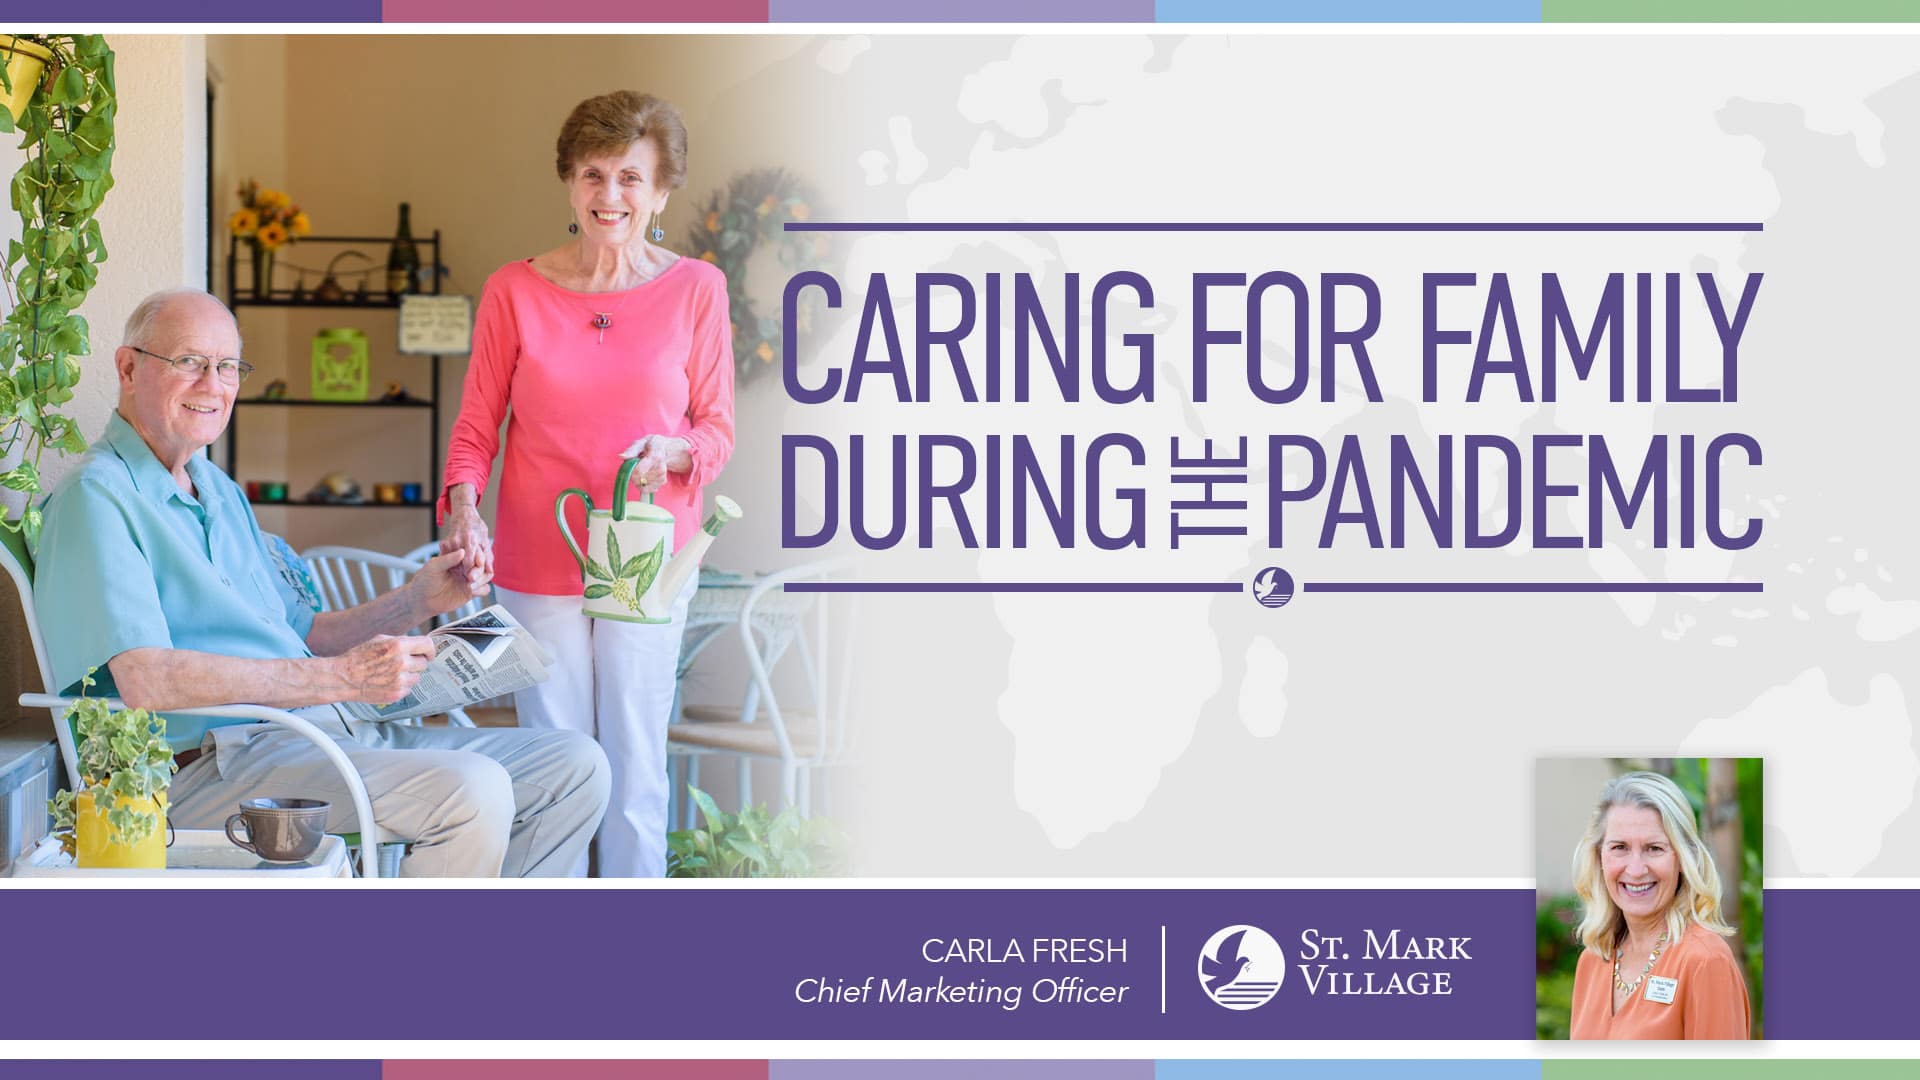 Caring for family during the pandemic.